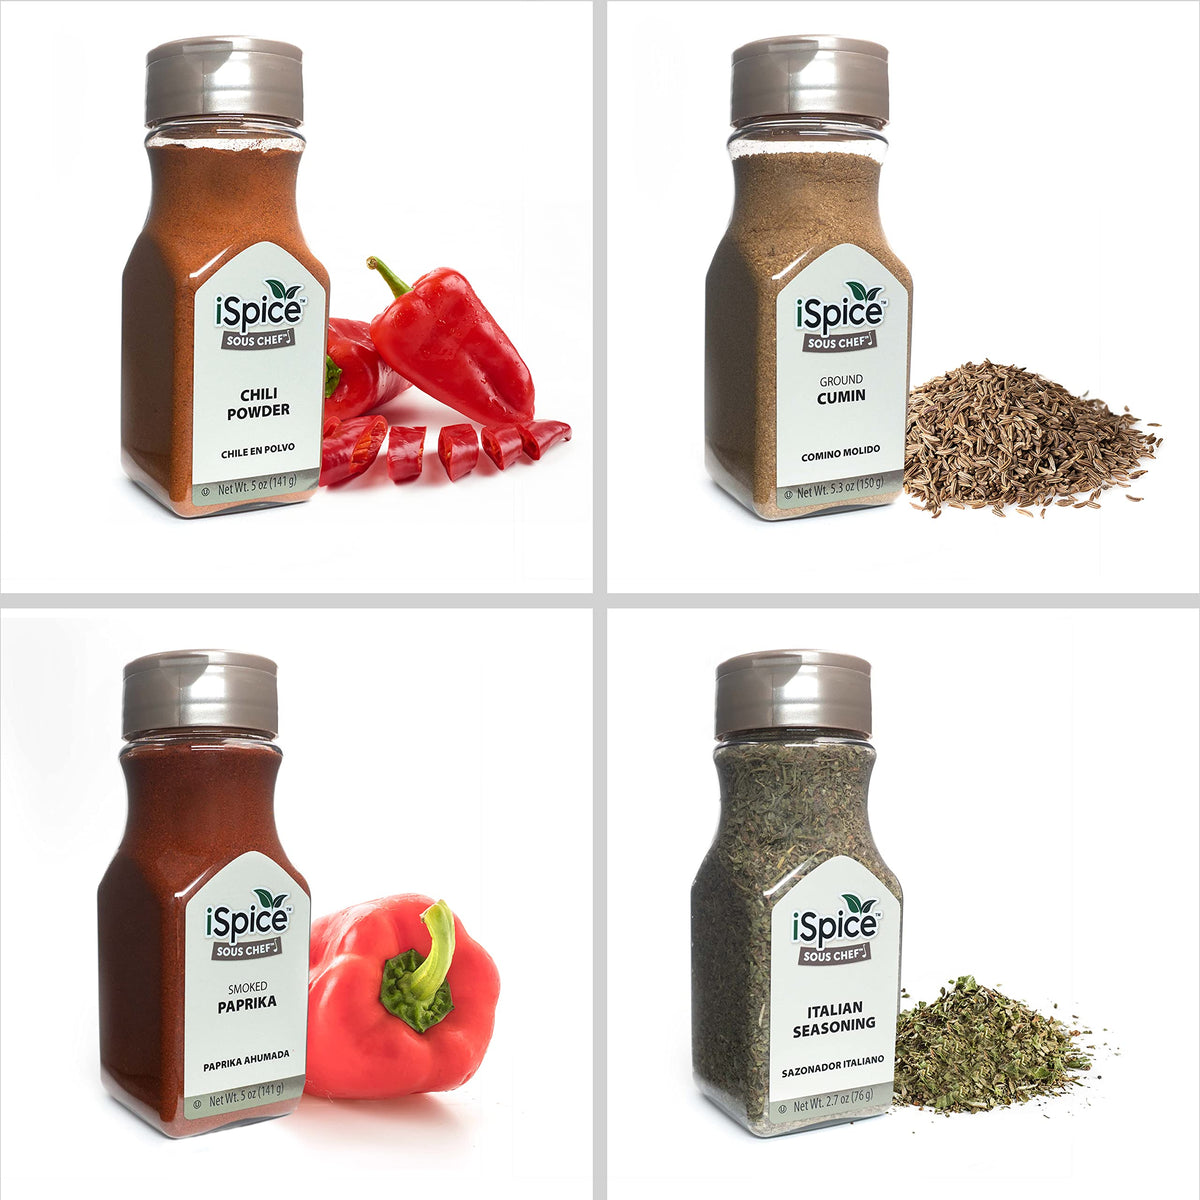 Offers on traditional ethnic condiments